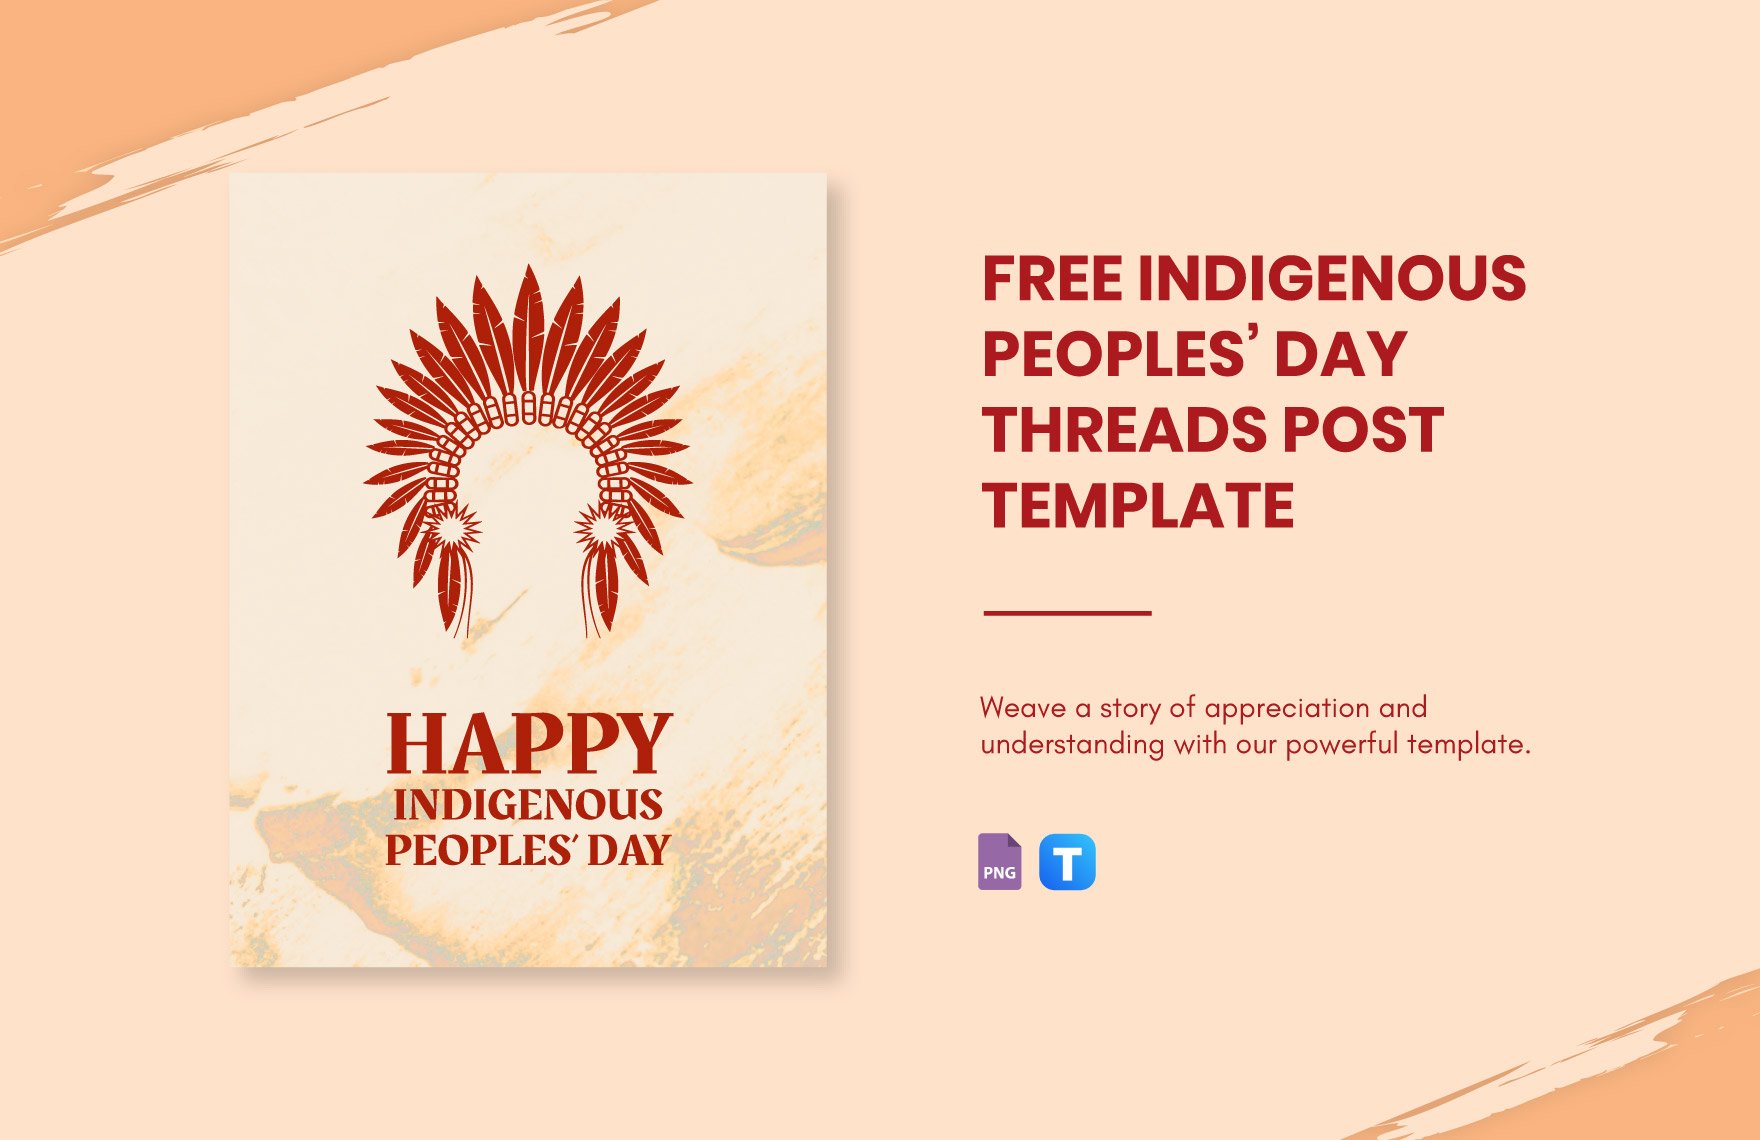 Free Indigenous Peoples' Day Threads Post Template in PNG